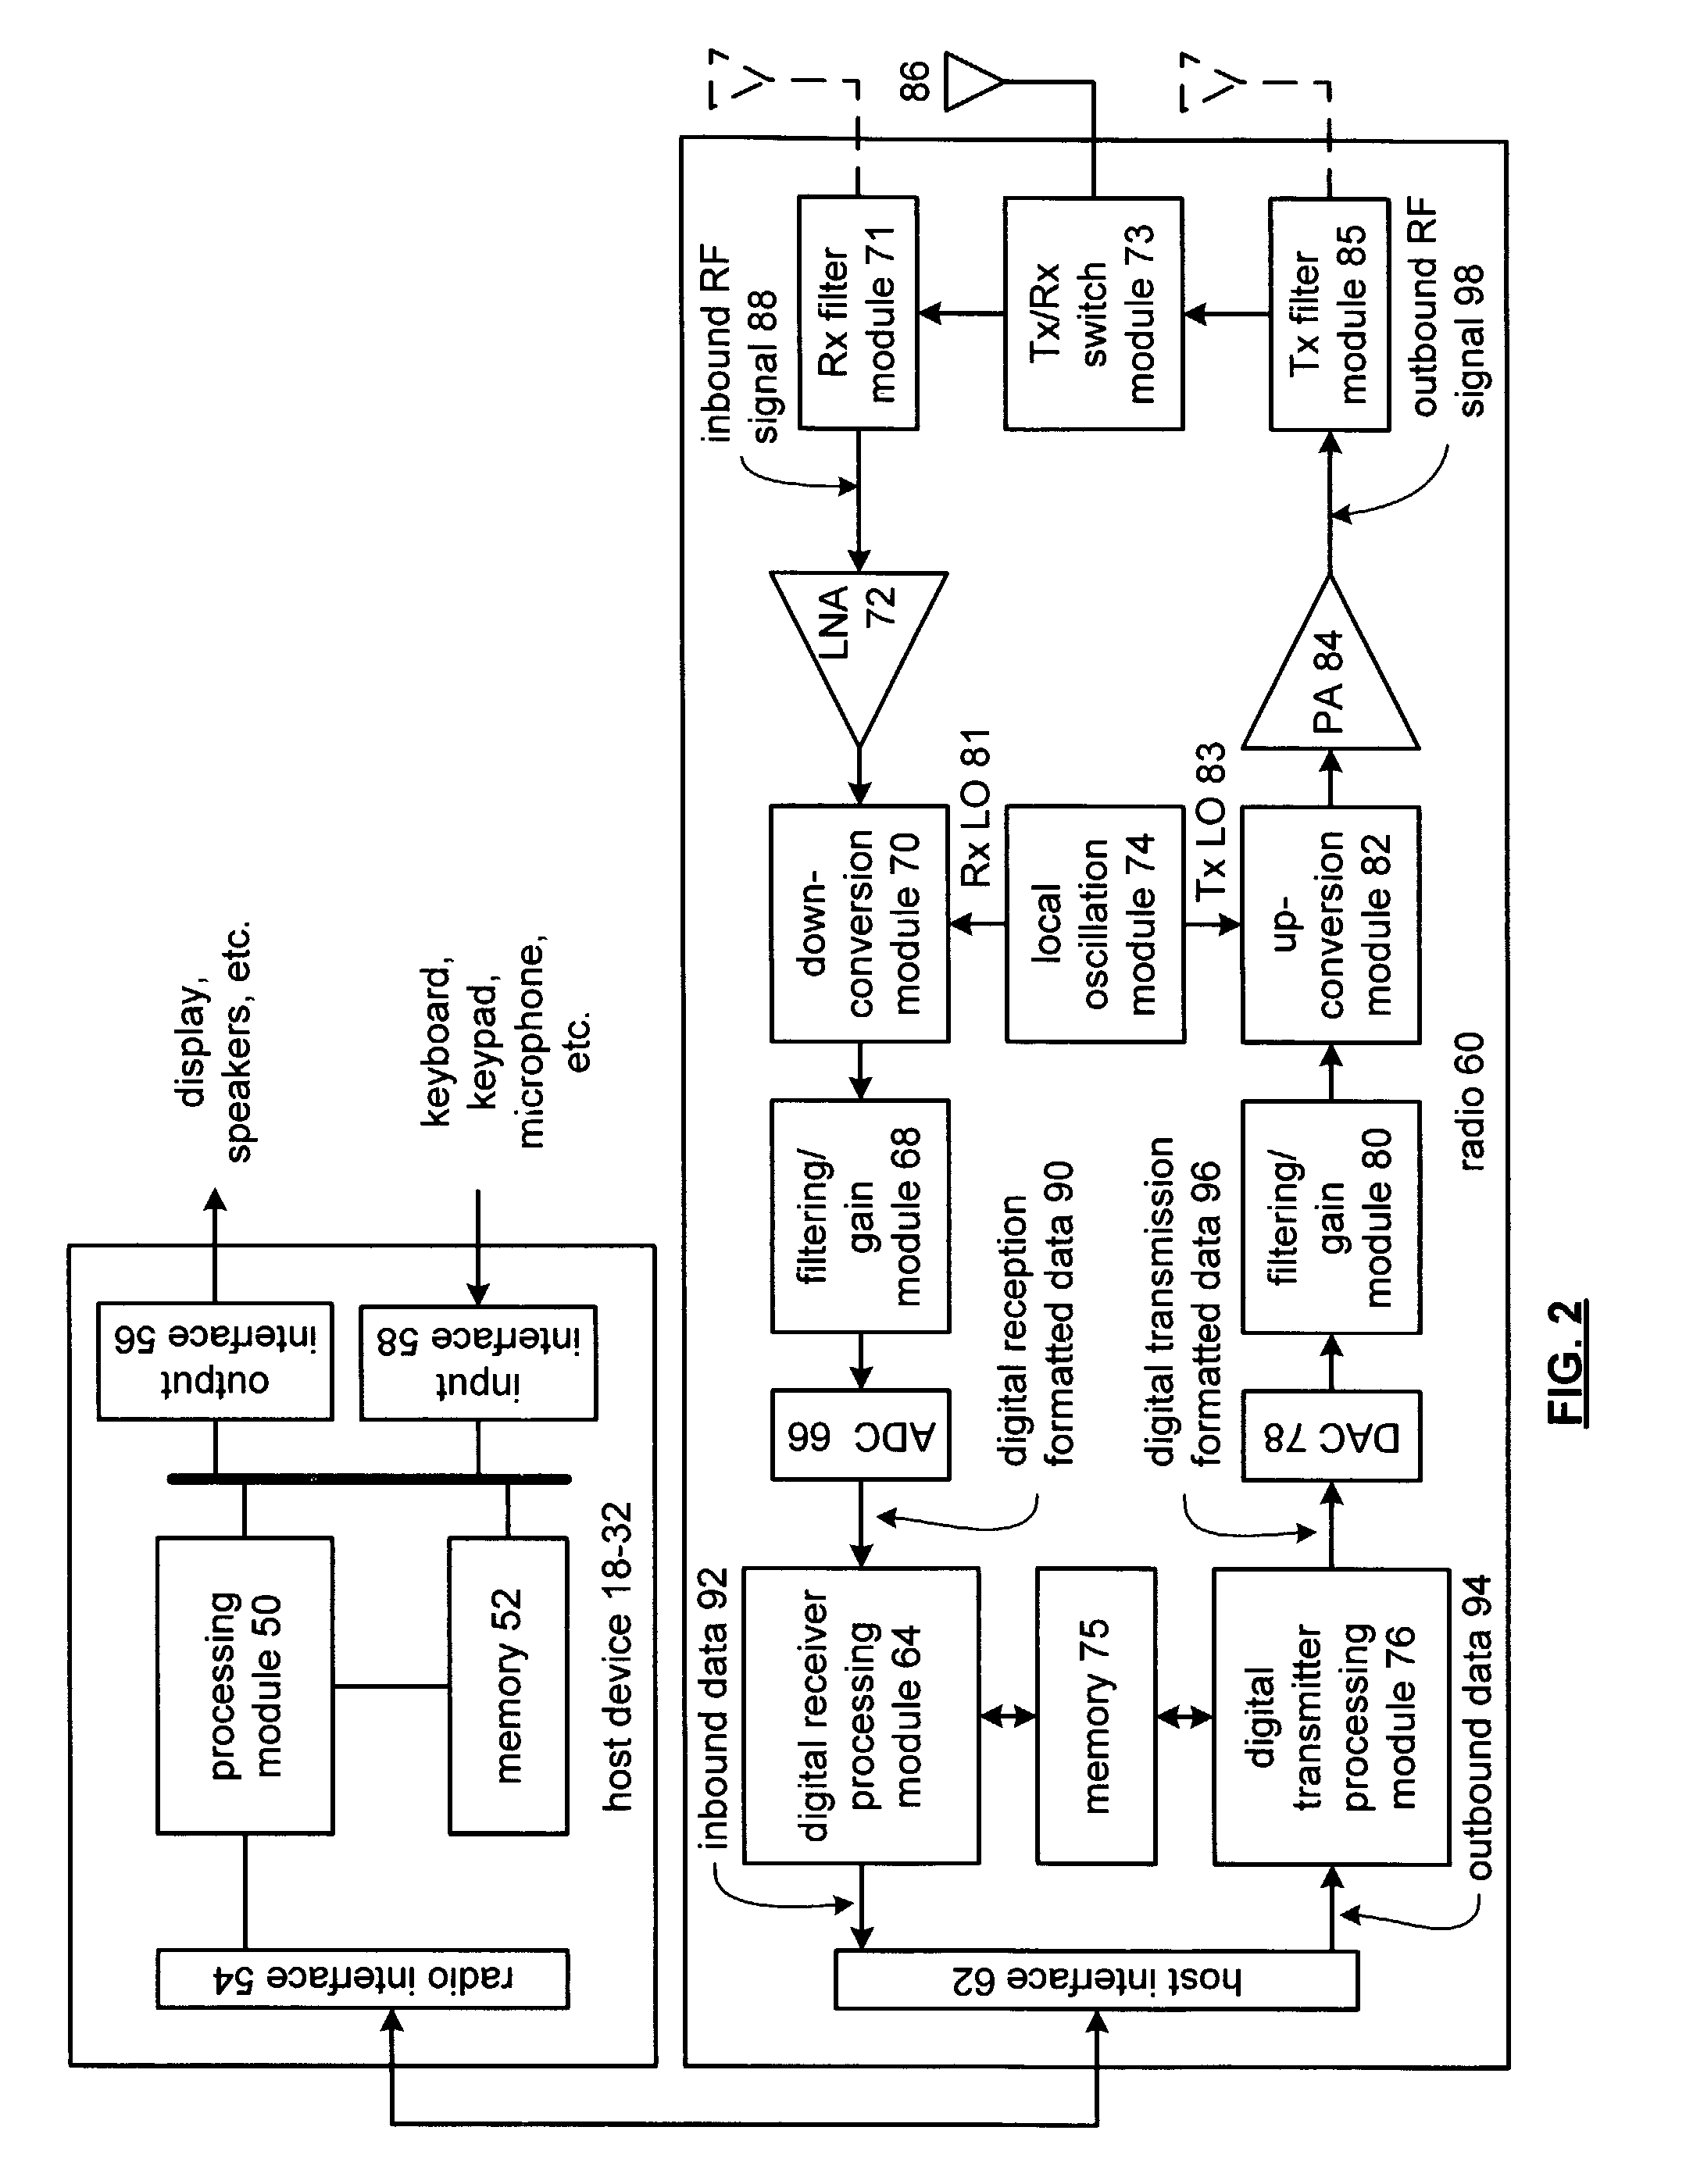 Linearized fractional-N synthesizer having a gated offset